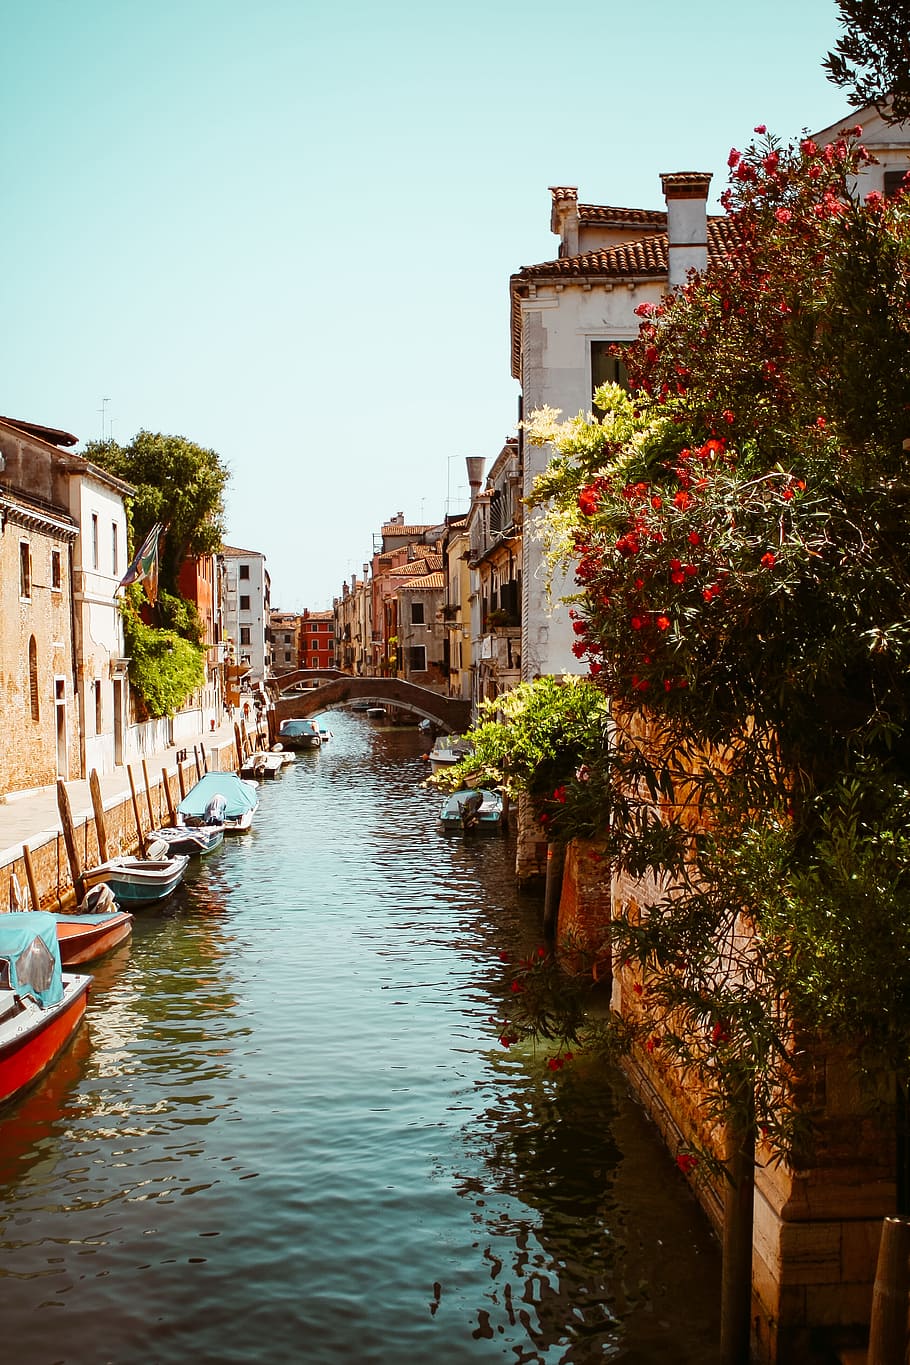 Venice Canals, Italy, architecture, boats, city, europe, flowers